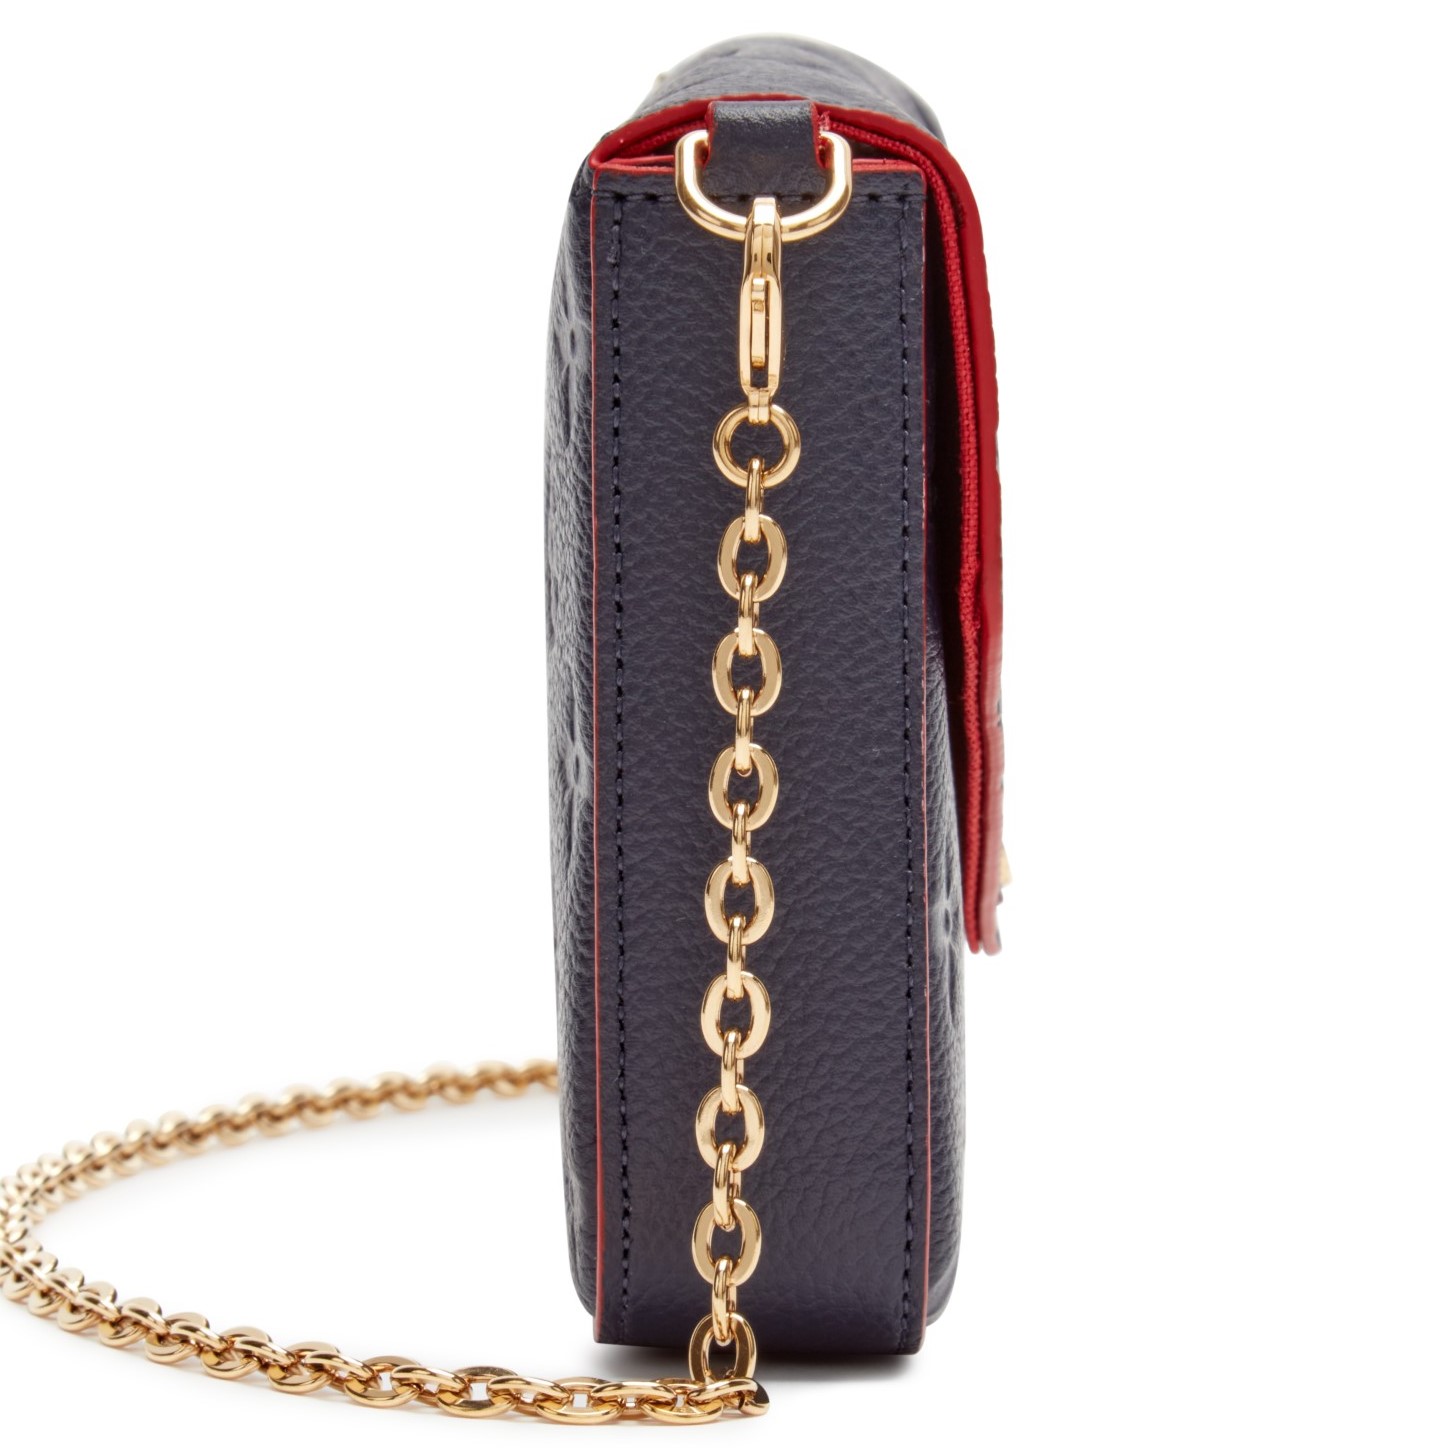 TÚI ĐEO CHÉO NỮ LV LOUIS VUITTON FÉLICIE POCHETTE MARINE ROUGE MONOGRAM EMPREINTE LEATHER WALLETS AND SMALL LEATHER GOODS M64099 16